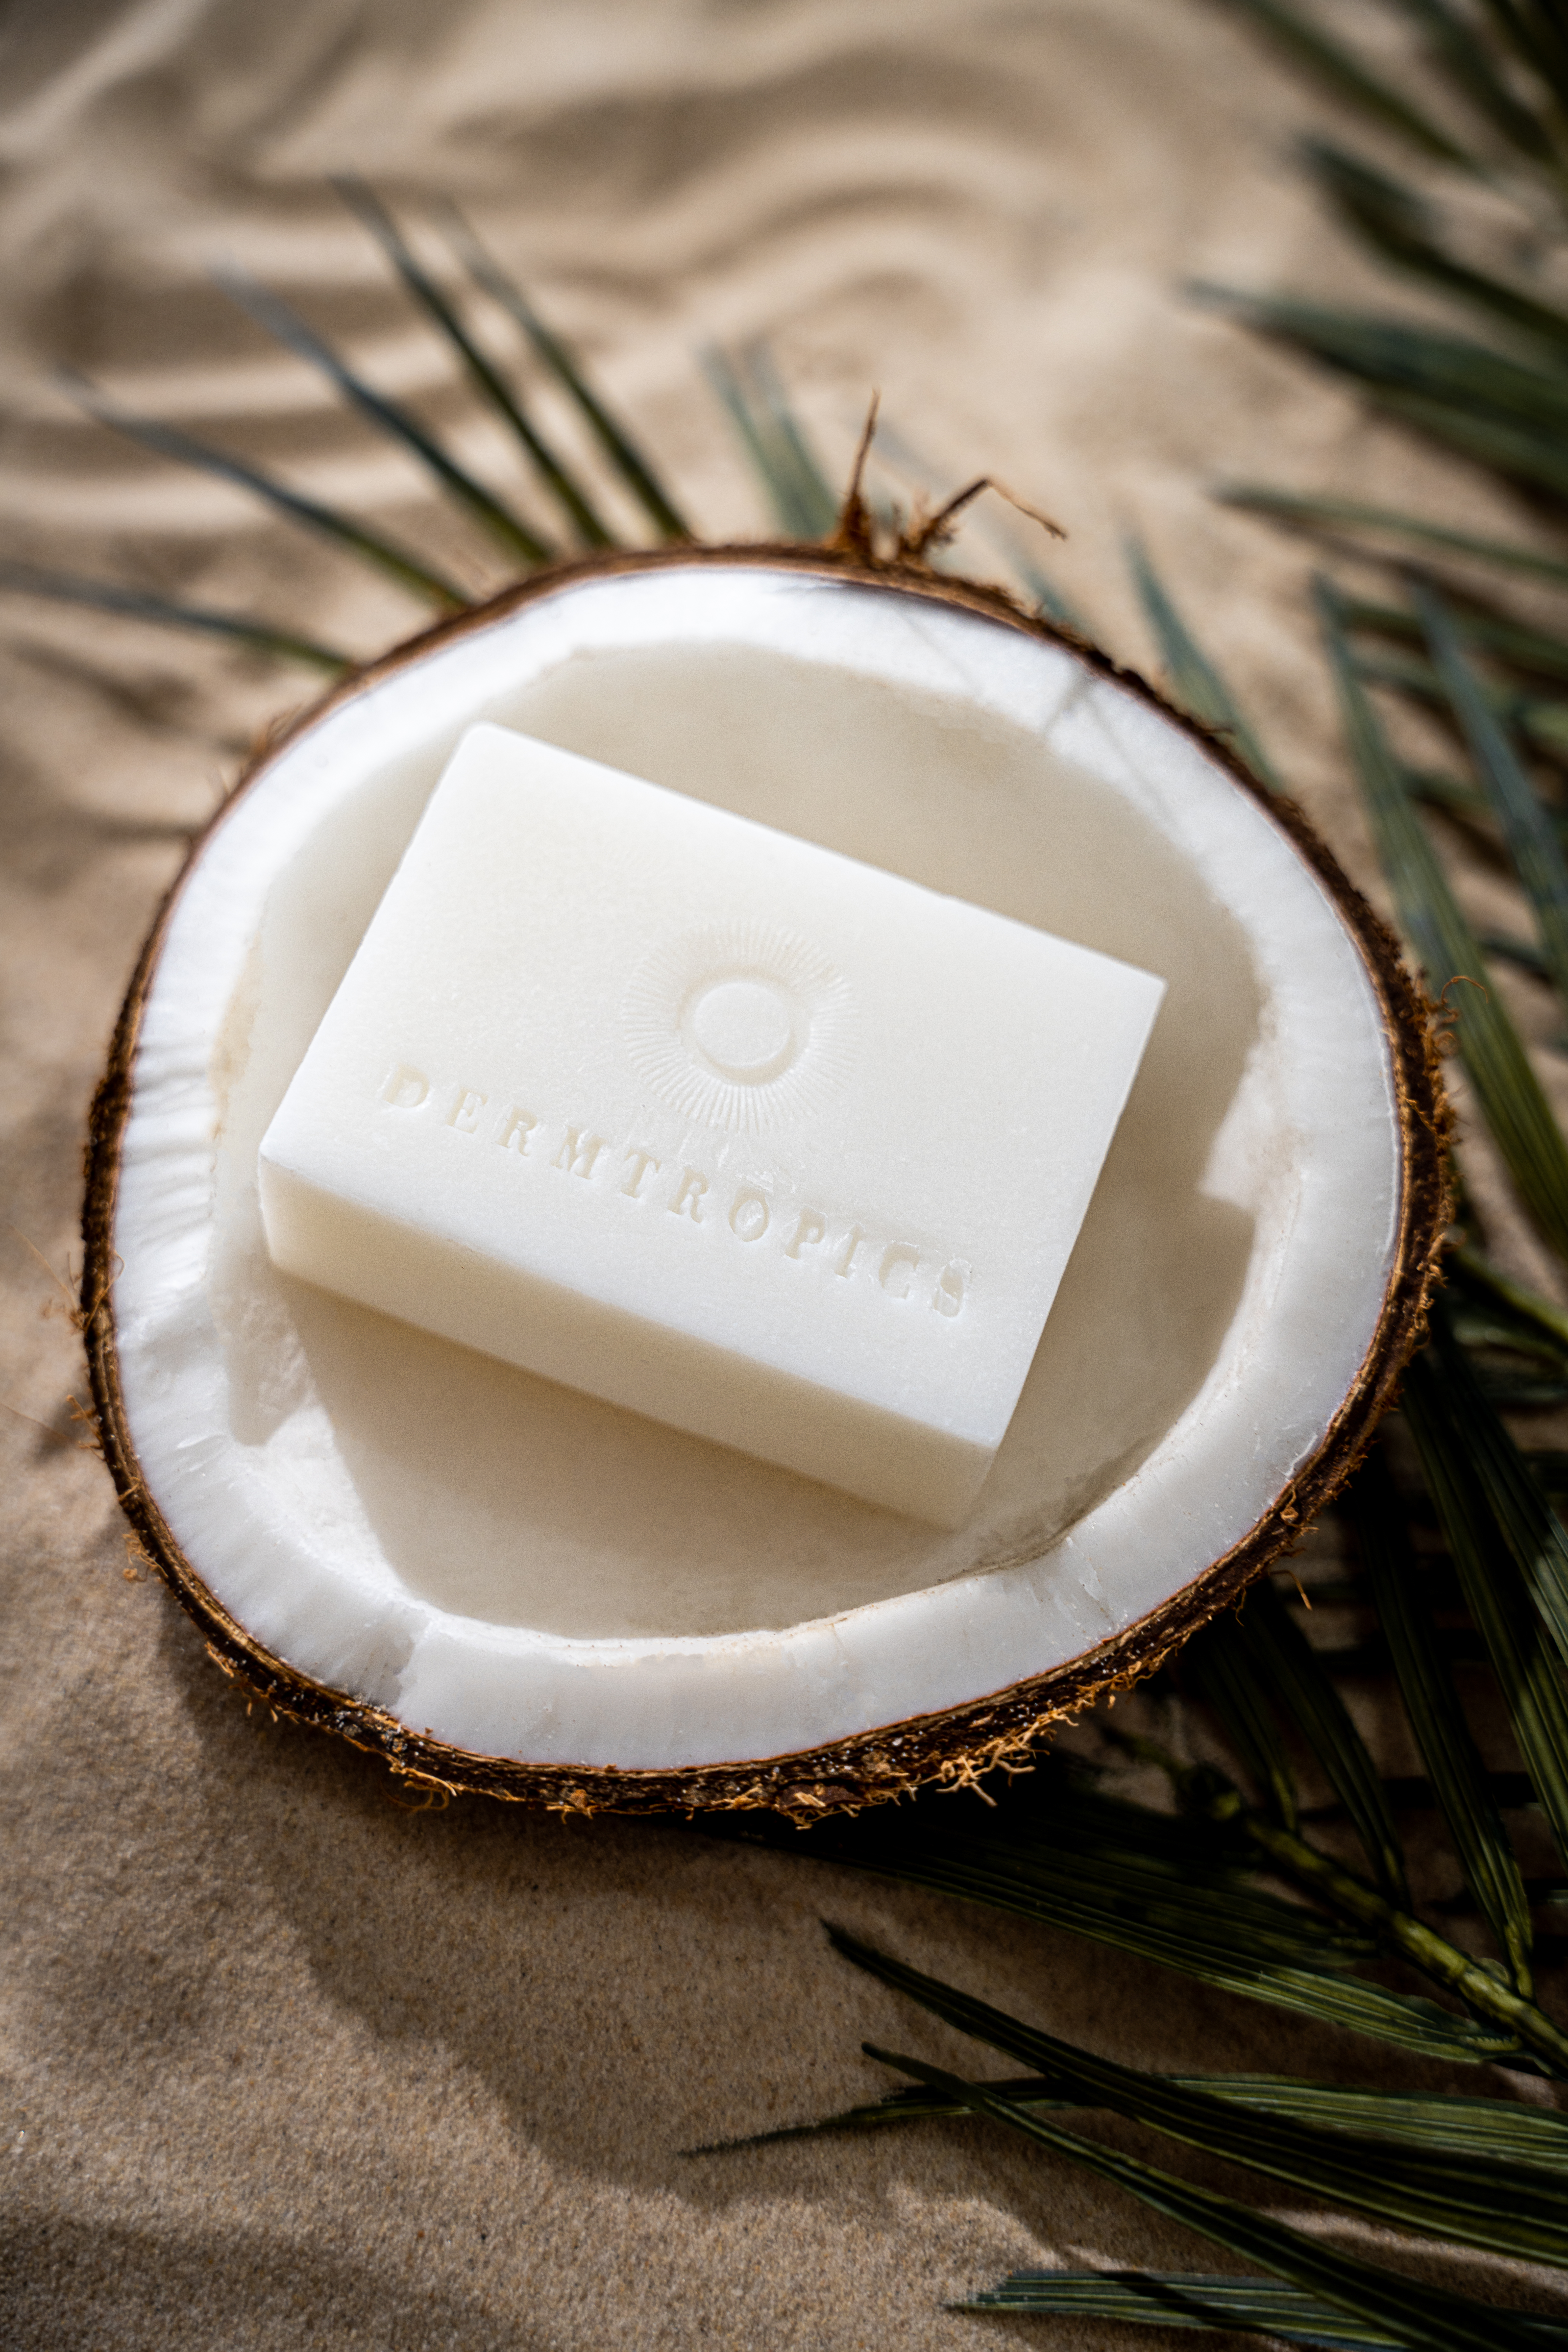 This Raw Beauty Brand is Giving Livelihood to Local Coconut Farmers